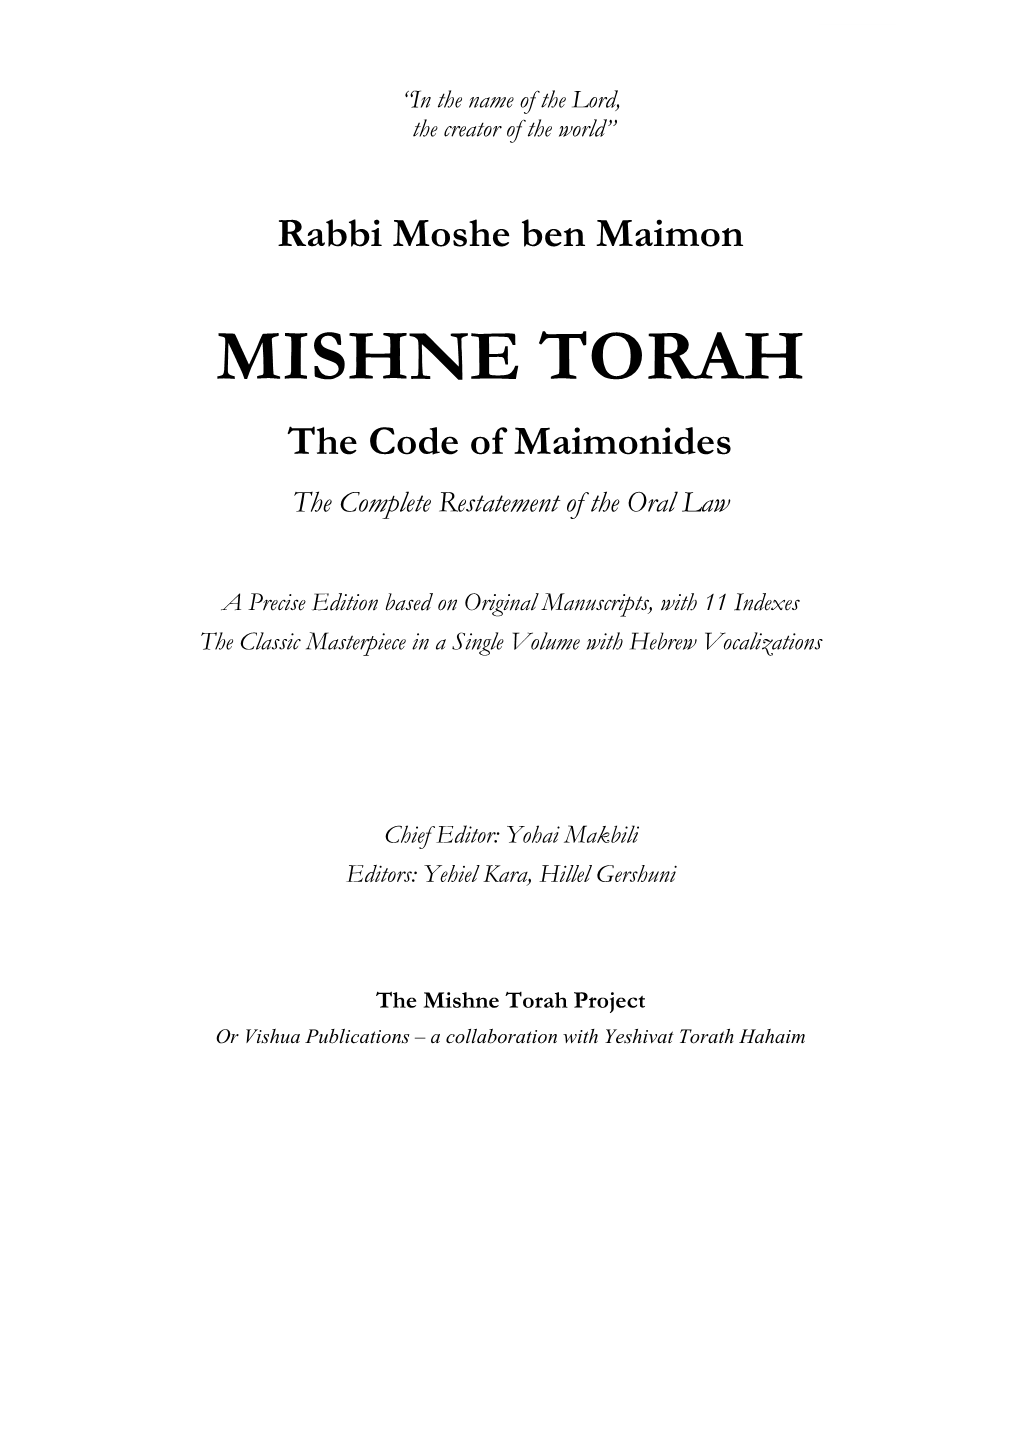 MISHNE TORAH the Code of Maimonides the Complete Restatement of the Oral Law